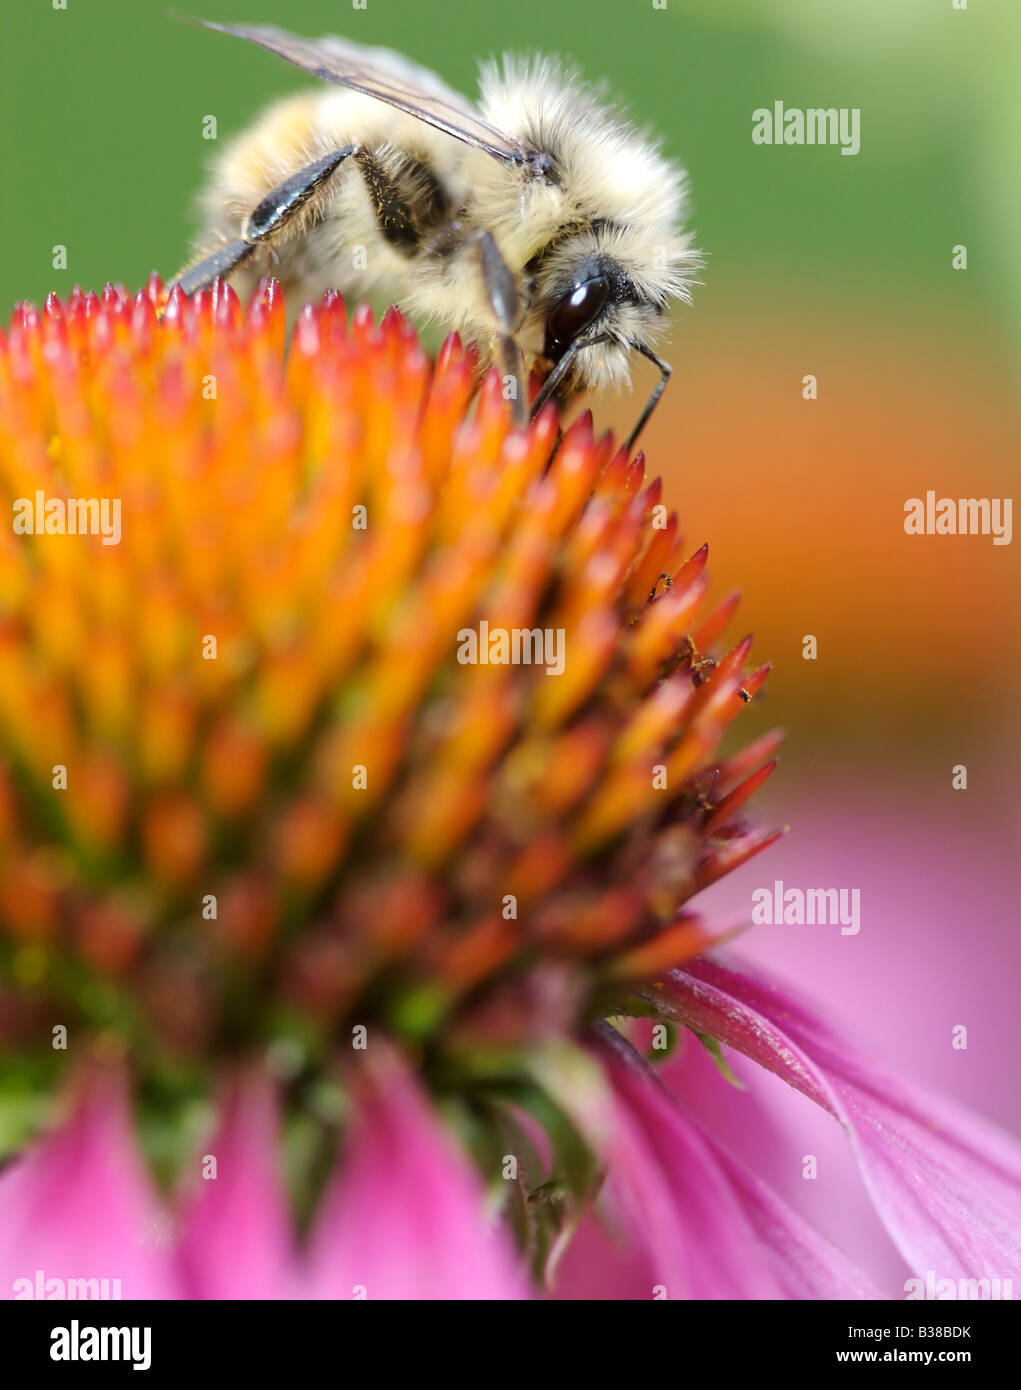 A bumblebee gathers nectar on a cone flower (echinacea). Stock Photo